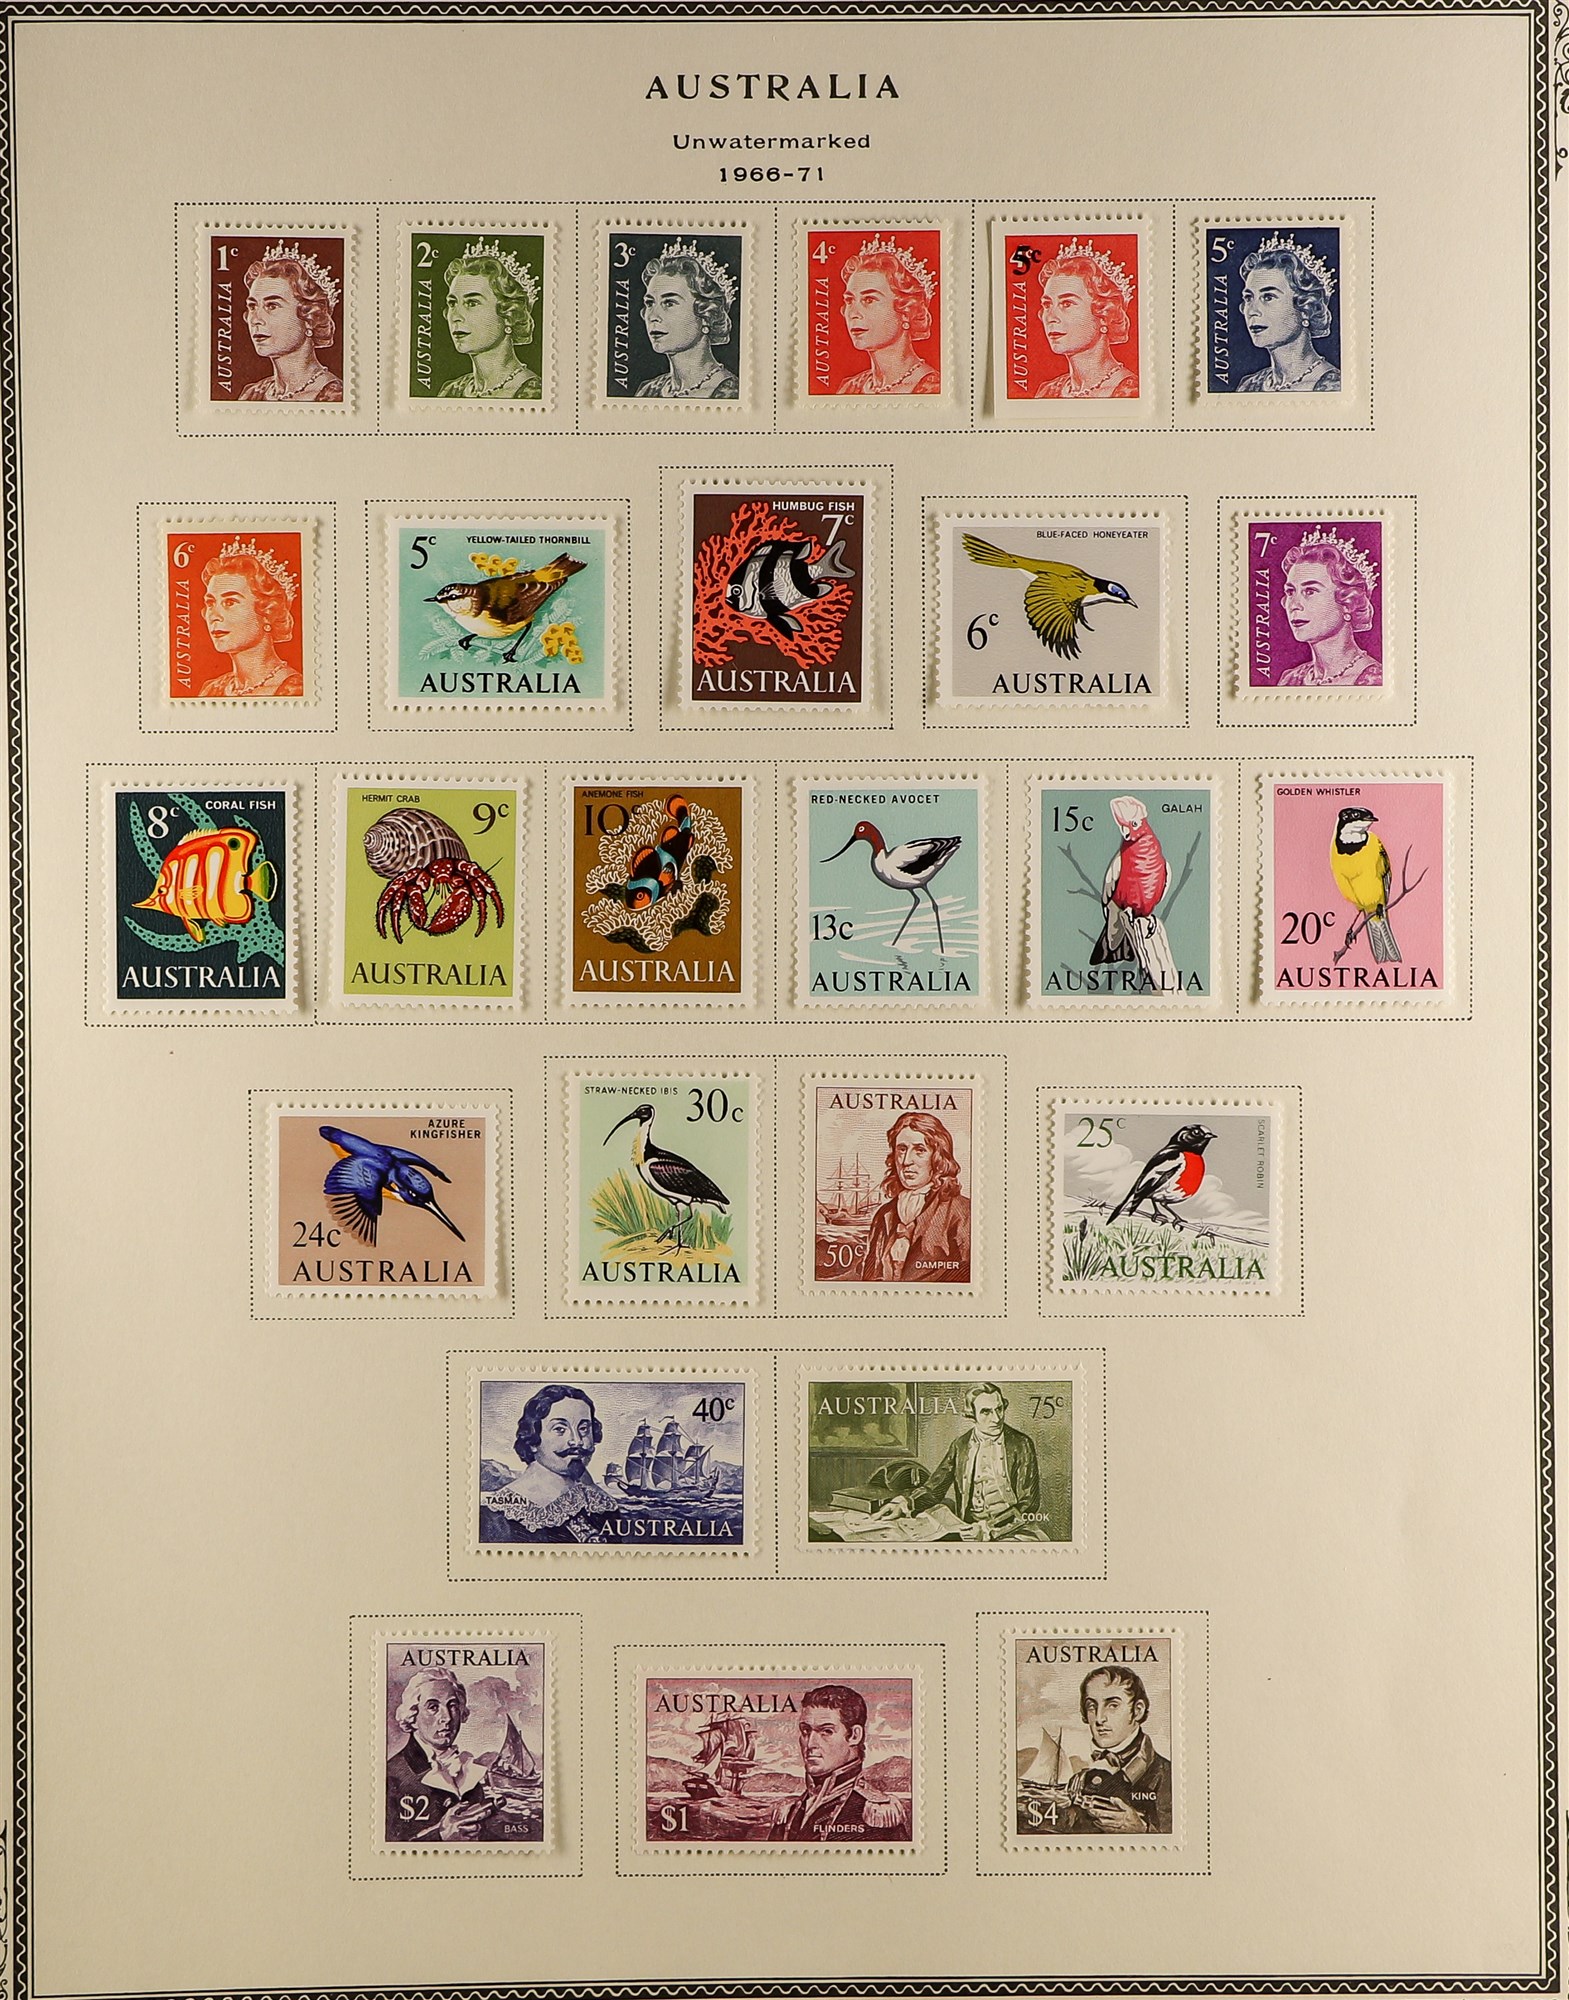 AUSTRALIA 1959 - 1971 MINT COLLECTION on several album pages includes the 1963-65 Navigators set, - Image 5 of 5